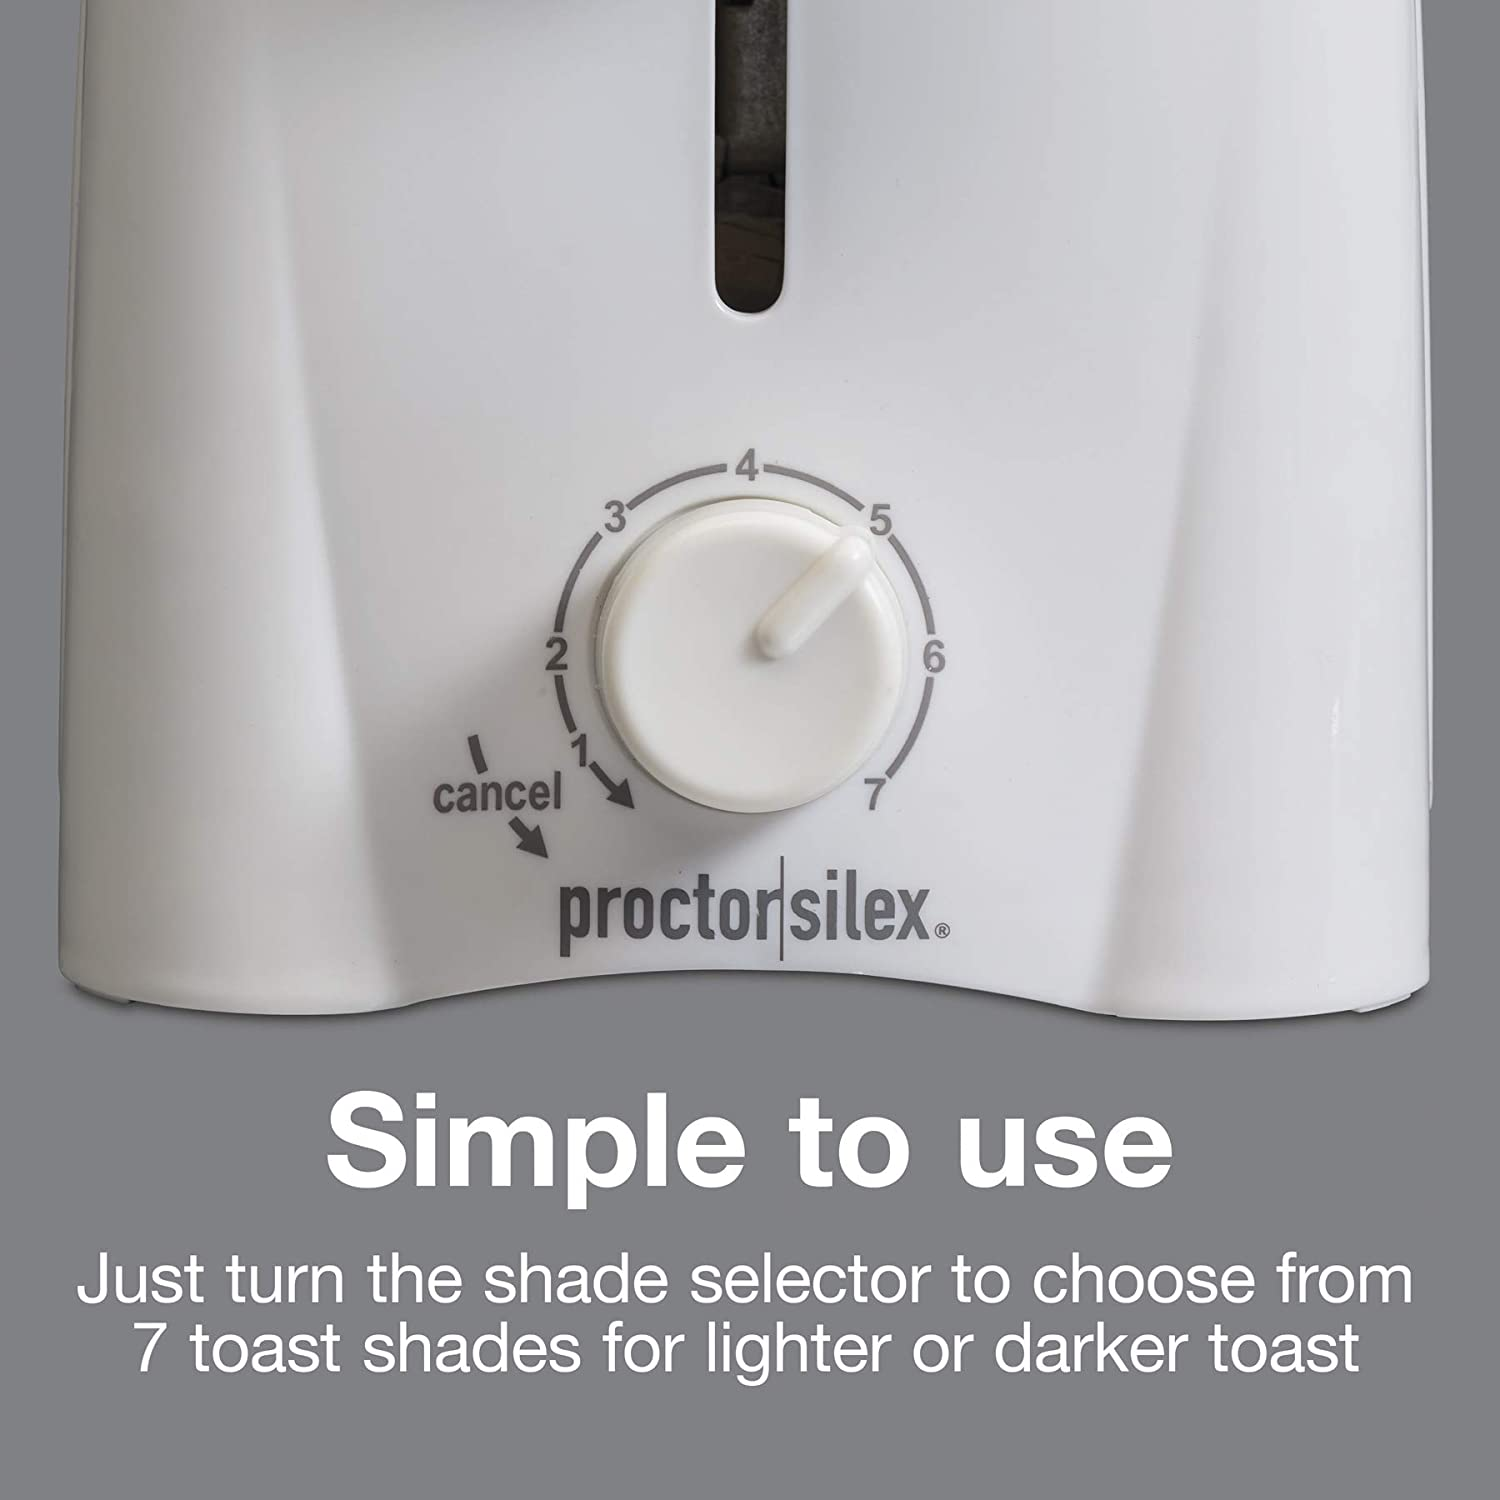 Proctor Silex 2-Slice Toaster with Shade Selector, Toast Boost, Slide-Out Crumb Tray, Auto-Shutoff and Cancel Button, White (22611)